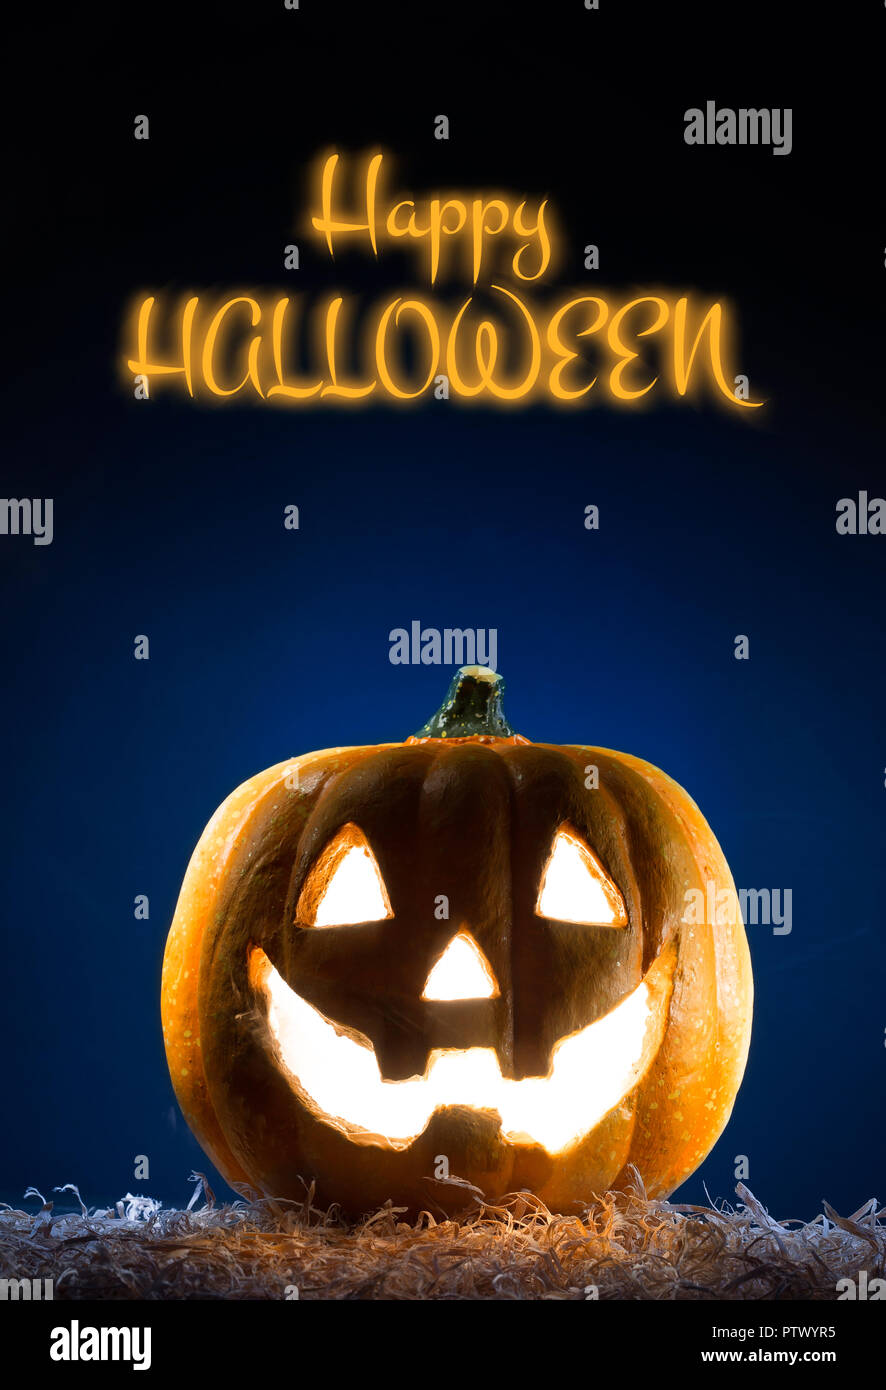 Happy halloween poster, halloween party festive banner, copy space Stock Photo